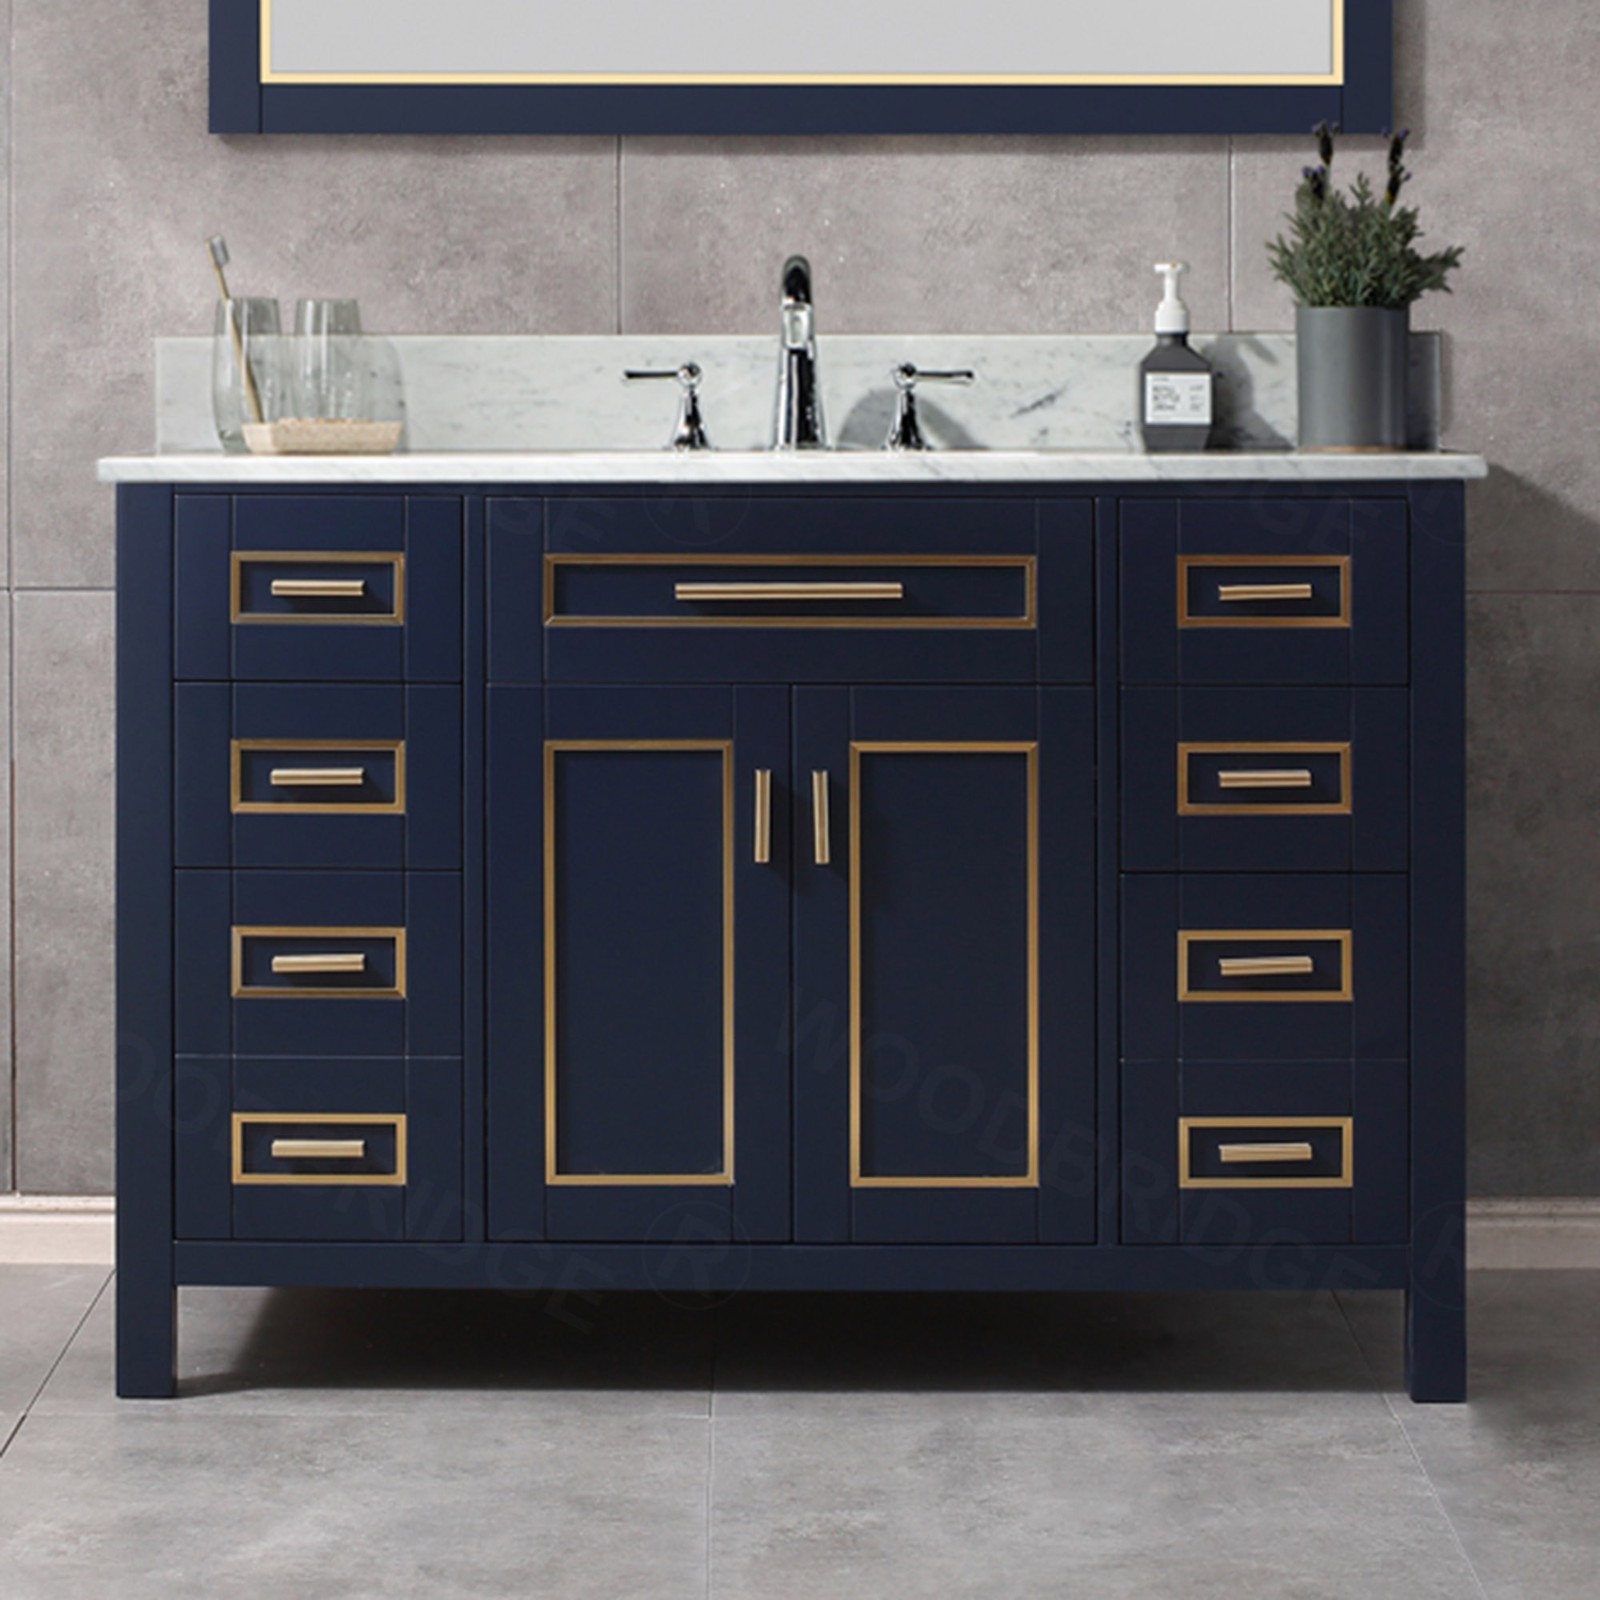  WOODBRIDGE Milan  49” Floor Mounted Single Basin Vanity Set with Solid Wood Cabinet in Navy Blue, and Carrara White Marble Vanity Top with Pre-installed Undermount Rectangle Bathroom Sink in White, Pre-Drilled 3-Hole for 8-inch Widespread Faucet_4732